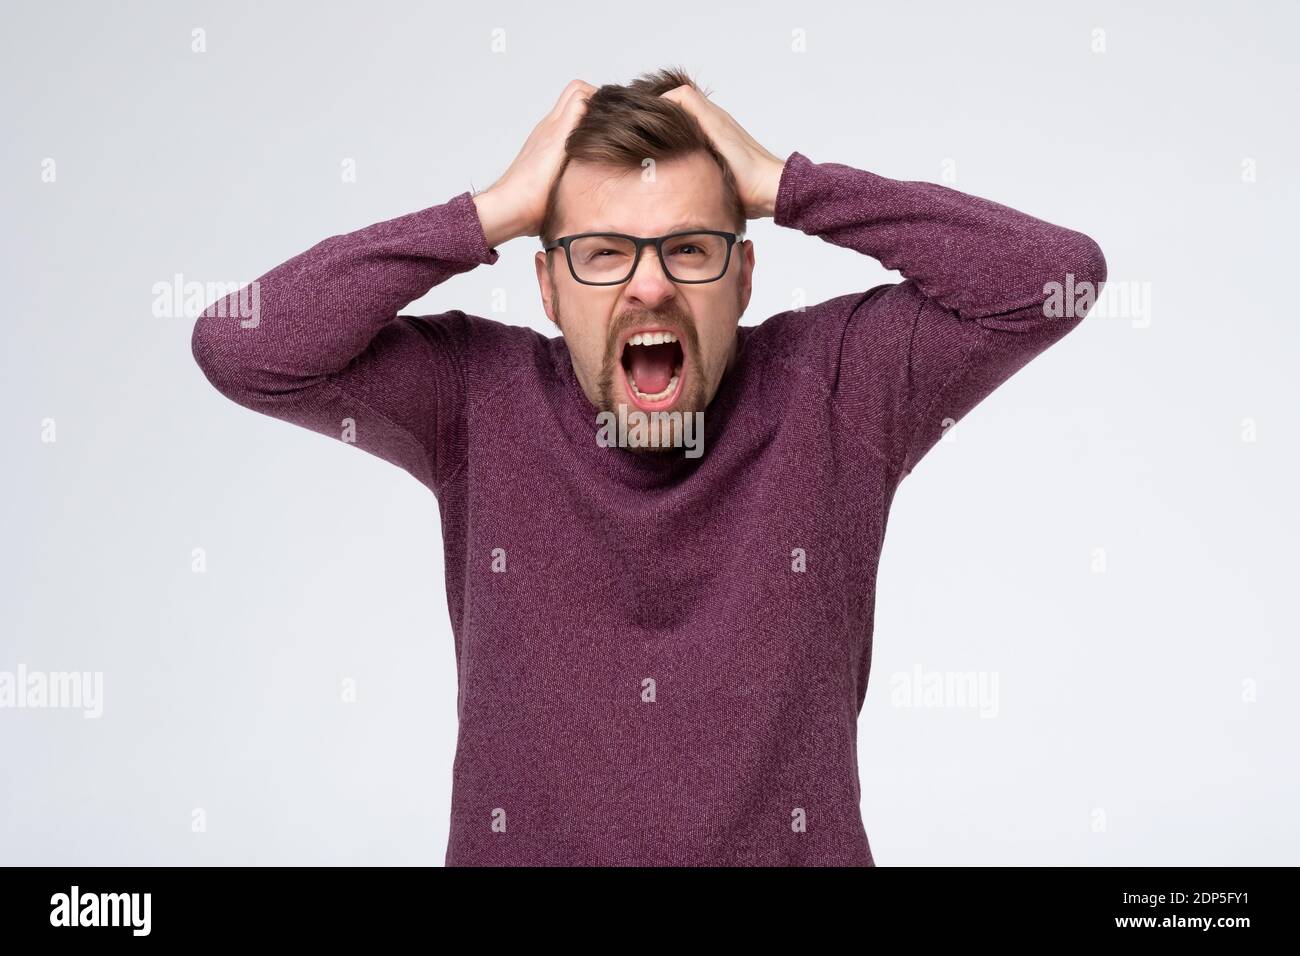 Mature caucasian man with glasses in pain and despair holding hands on head. Studio shot Stock Photo